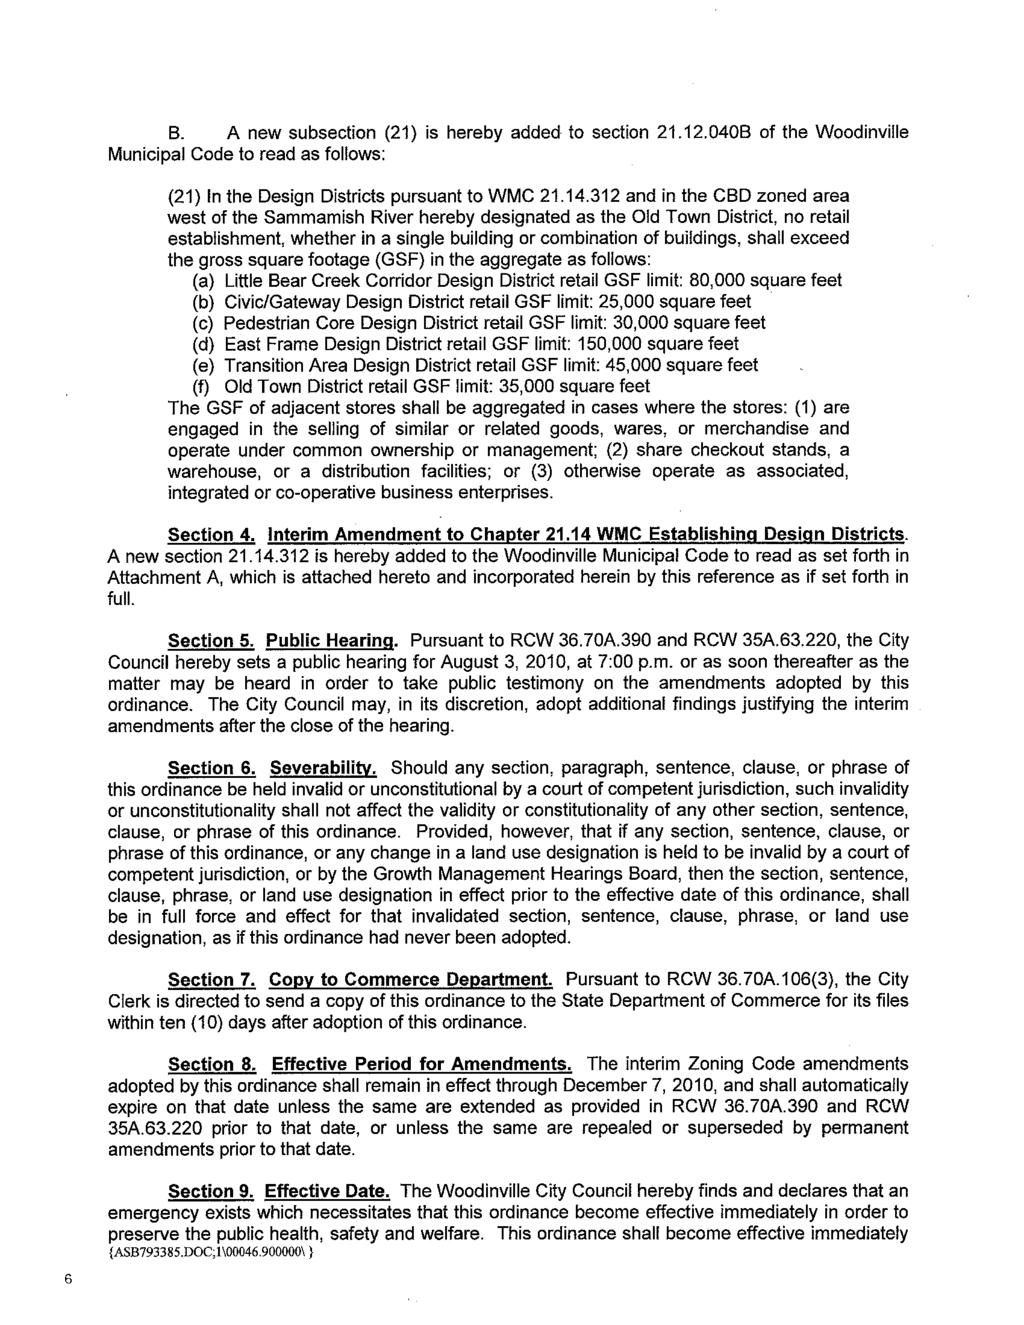 B. A new subsection (21) is hereby added to section 21.12.040B of the Woodinville Municipal Code to read as follows: (21) In the Design Districts pursuant to WMC 21.14.